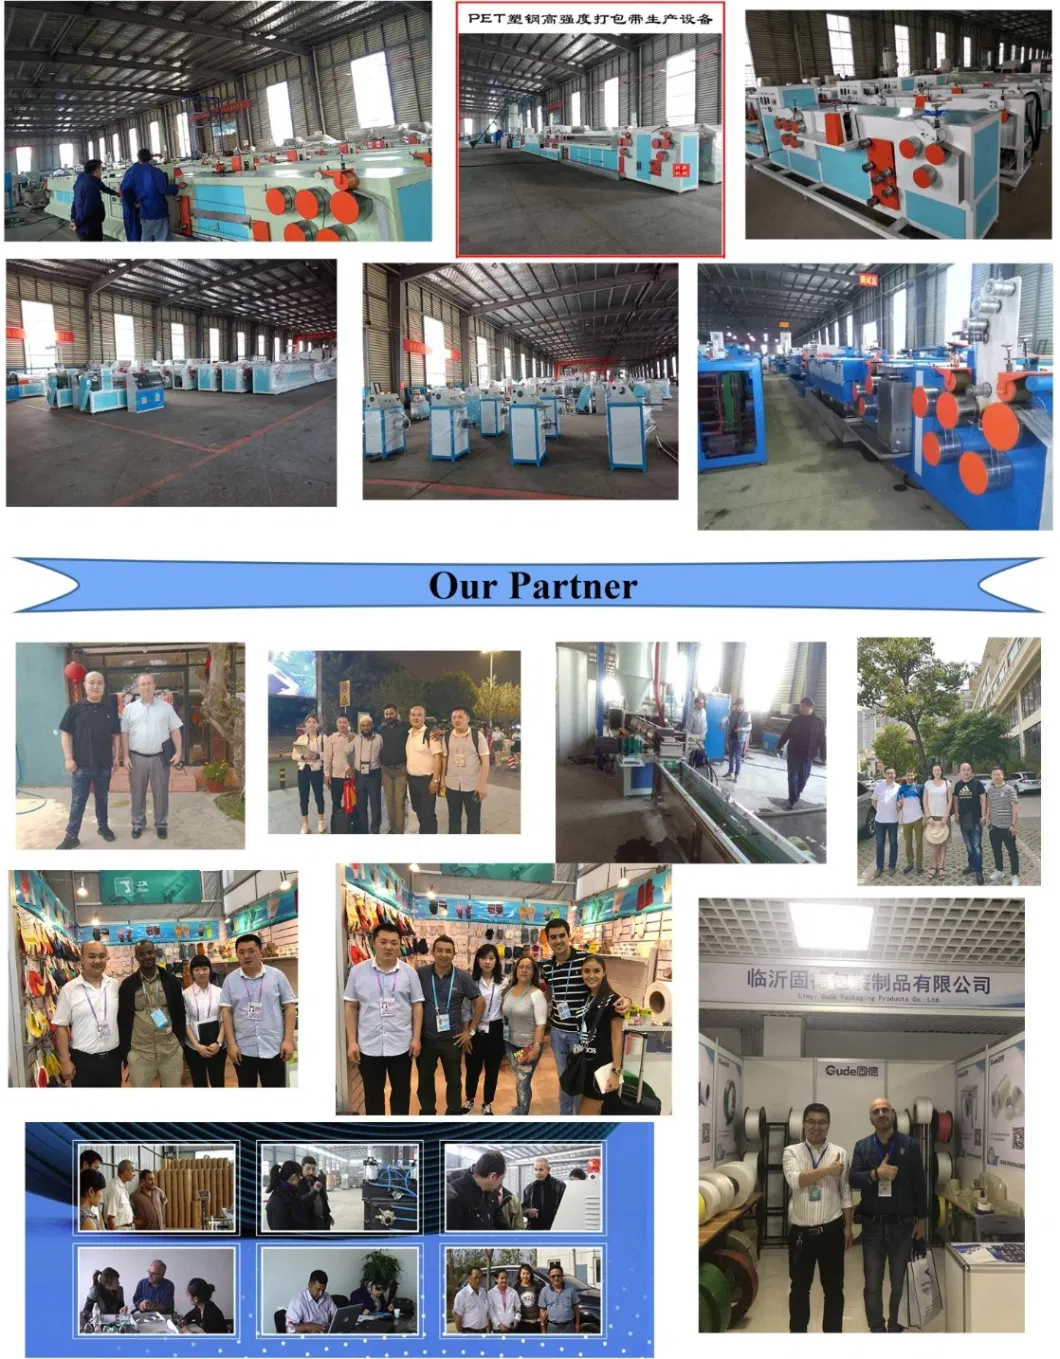 High Speed Used Monofilament PP Pet Strap Pipe Extrusion Machine Line/Pet Strapping Band Making Machines